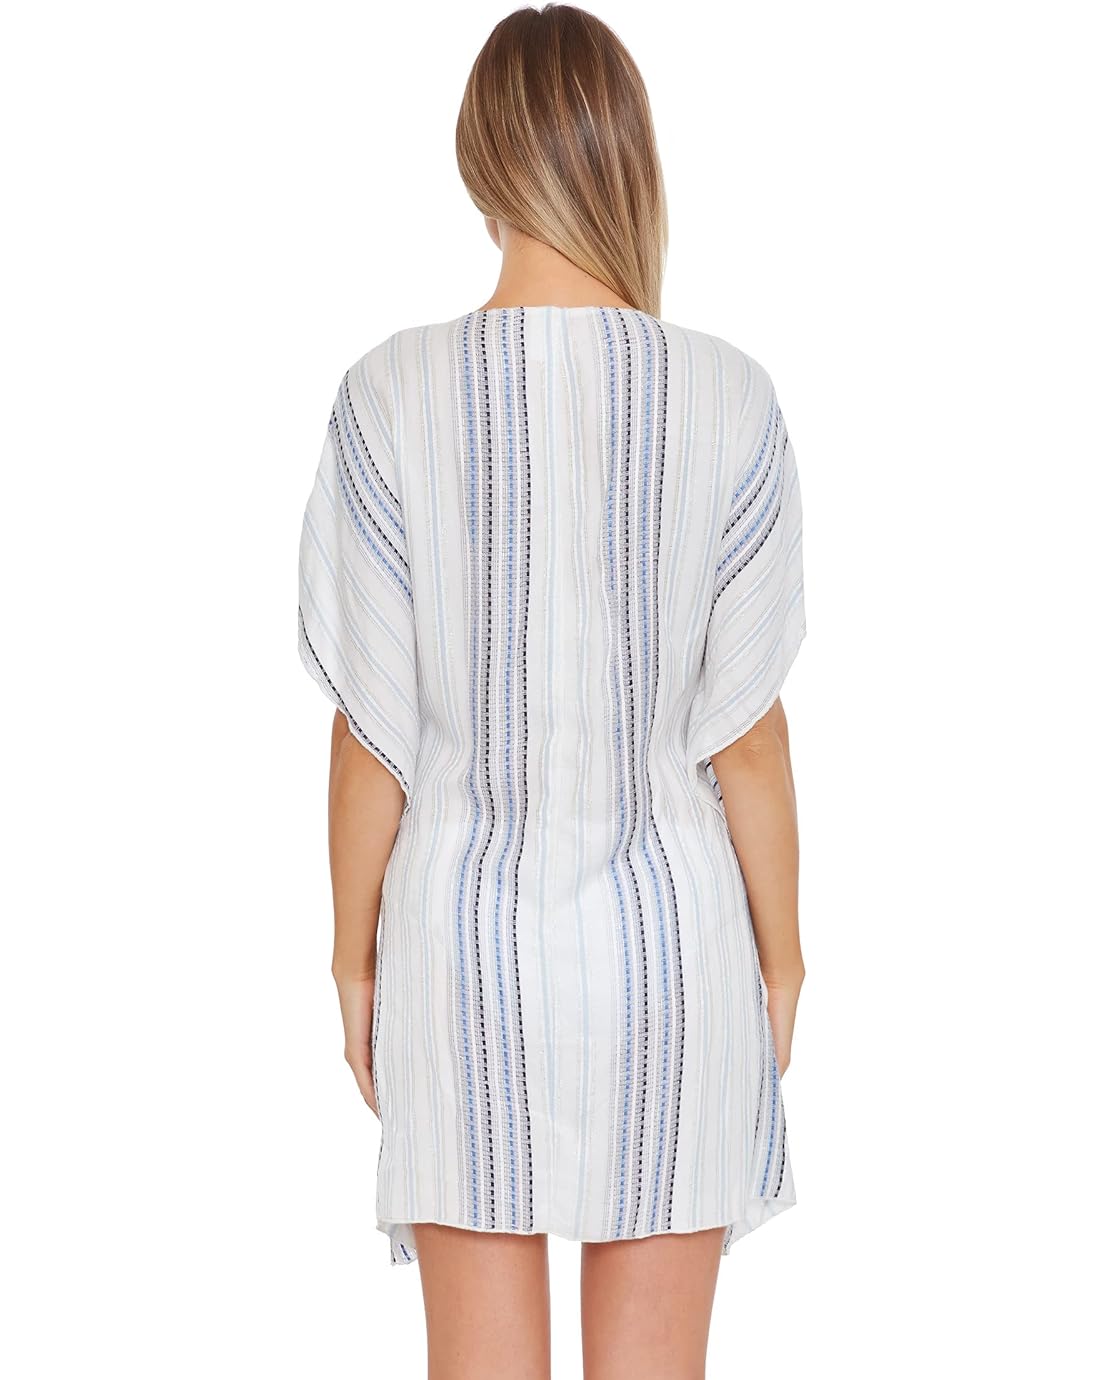  BECCA by Rebecca Virtue Radiance Woven Tunic Cover-Up